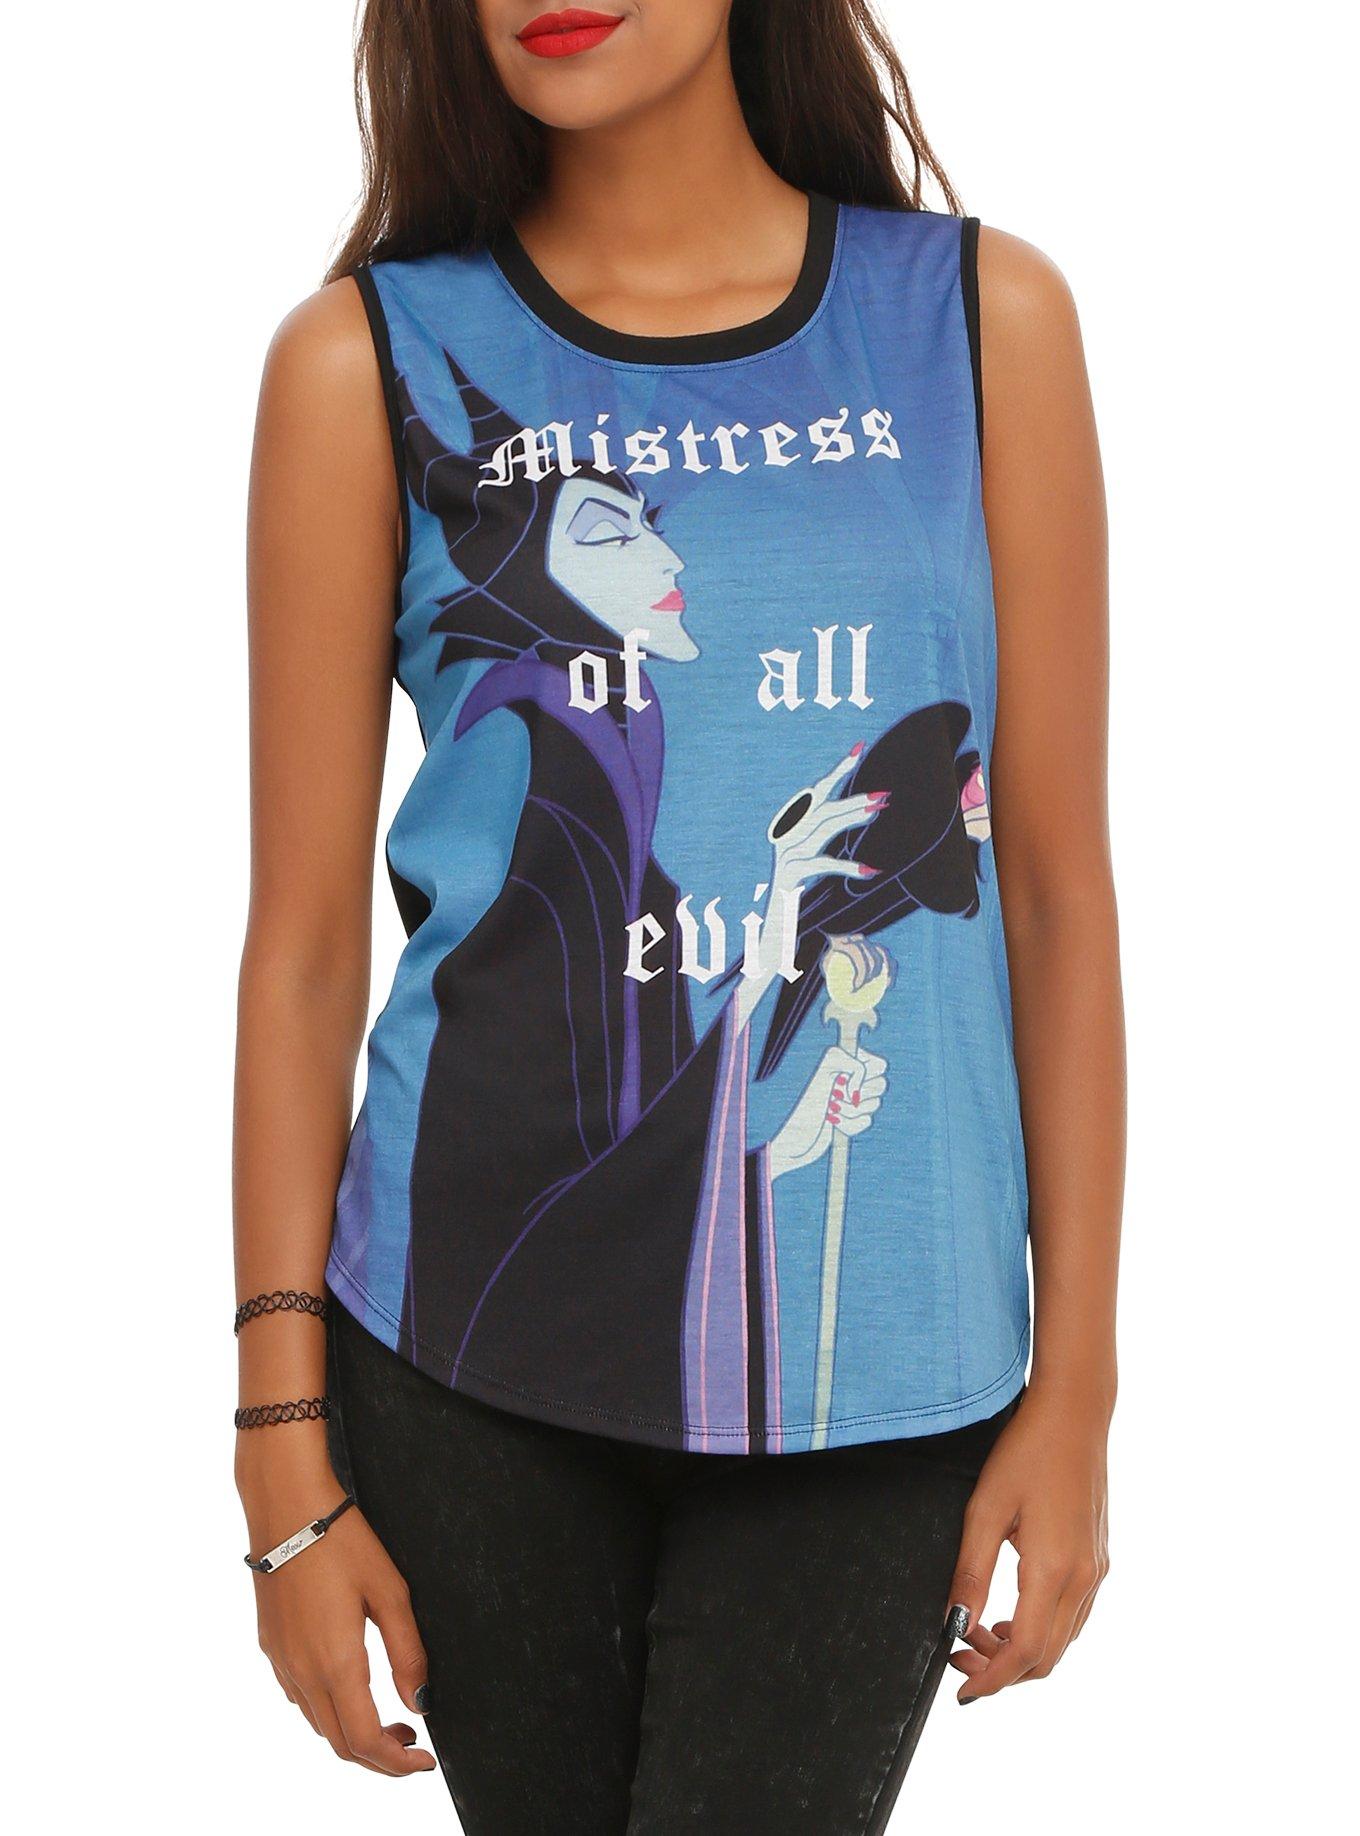 Disney Sleeping Beauty Maleficent Mistress Of All Evil Girls Muscle Top, ROYAL BLUE, hi-res